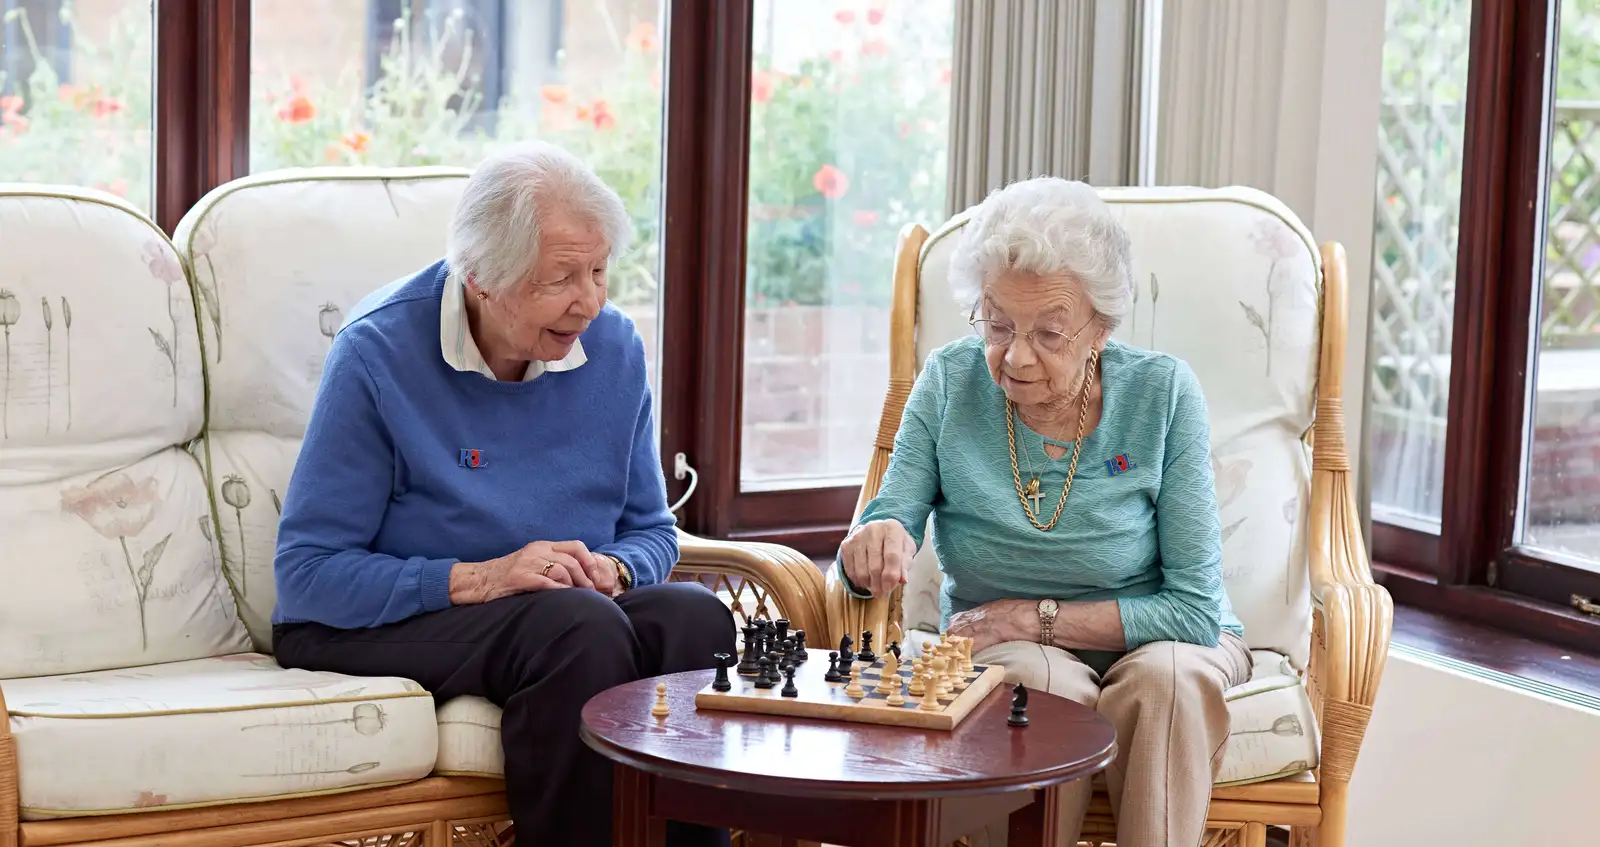 Care Homes Near Me. Day, Respite, Dementia Care: Friends of the